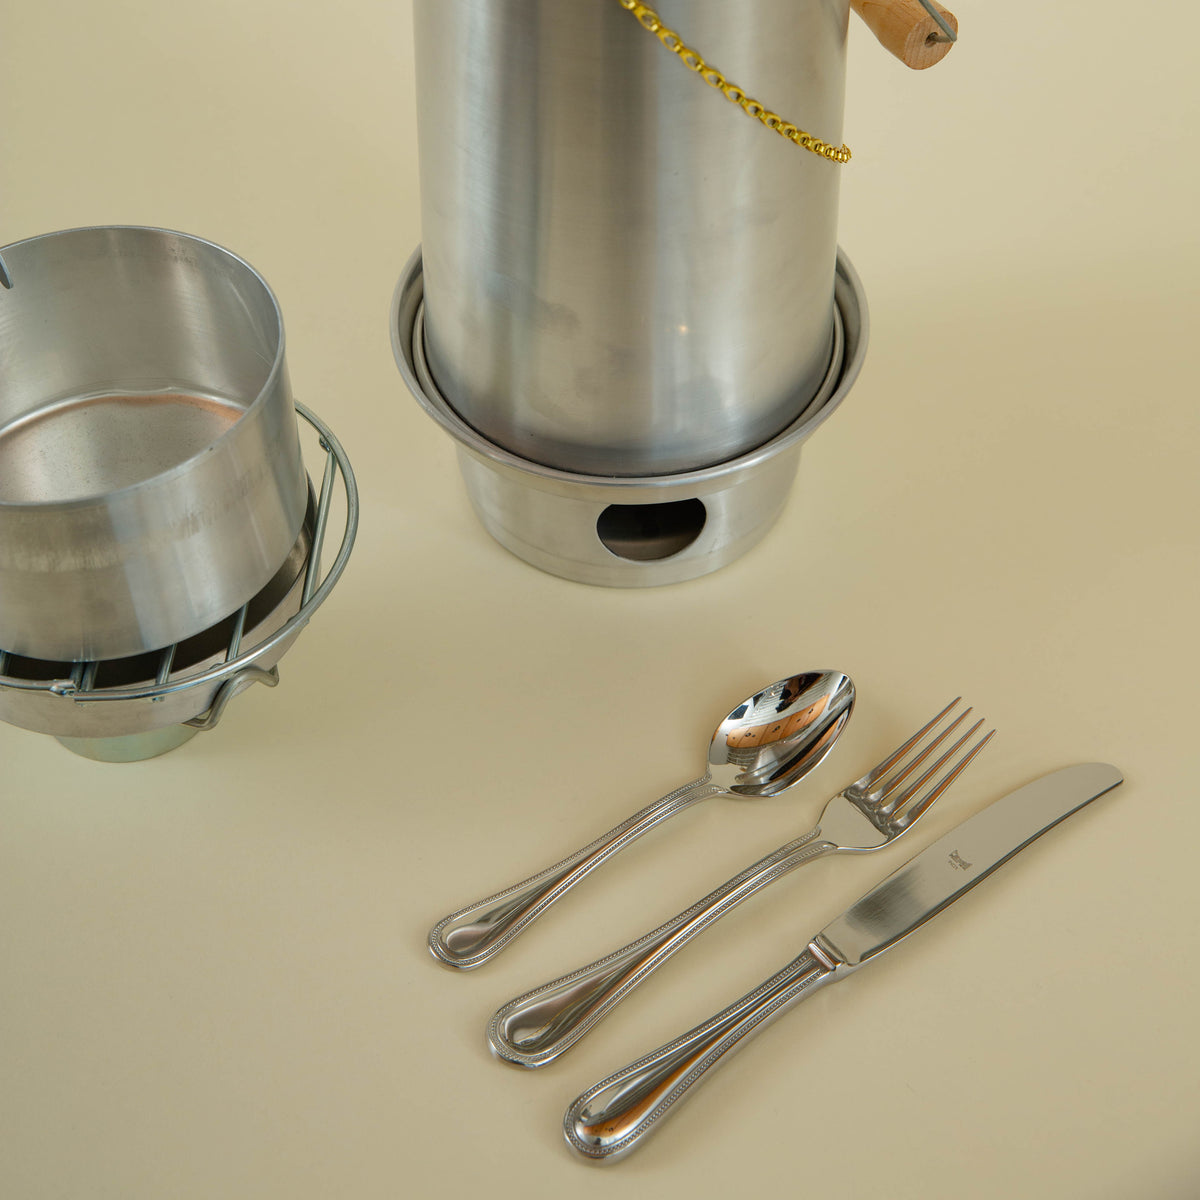 Flatware and Camping Cookware